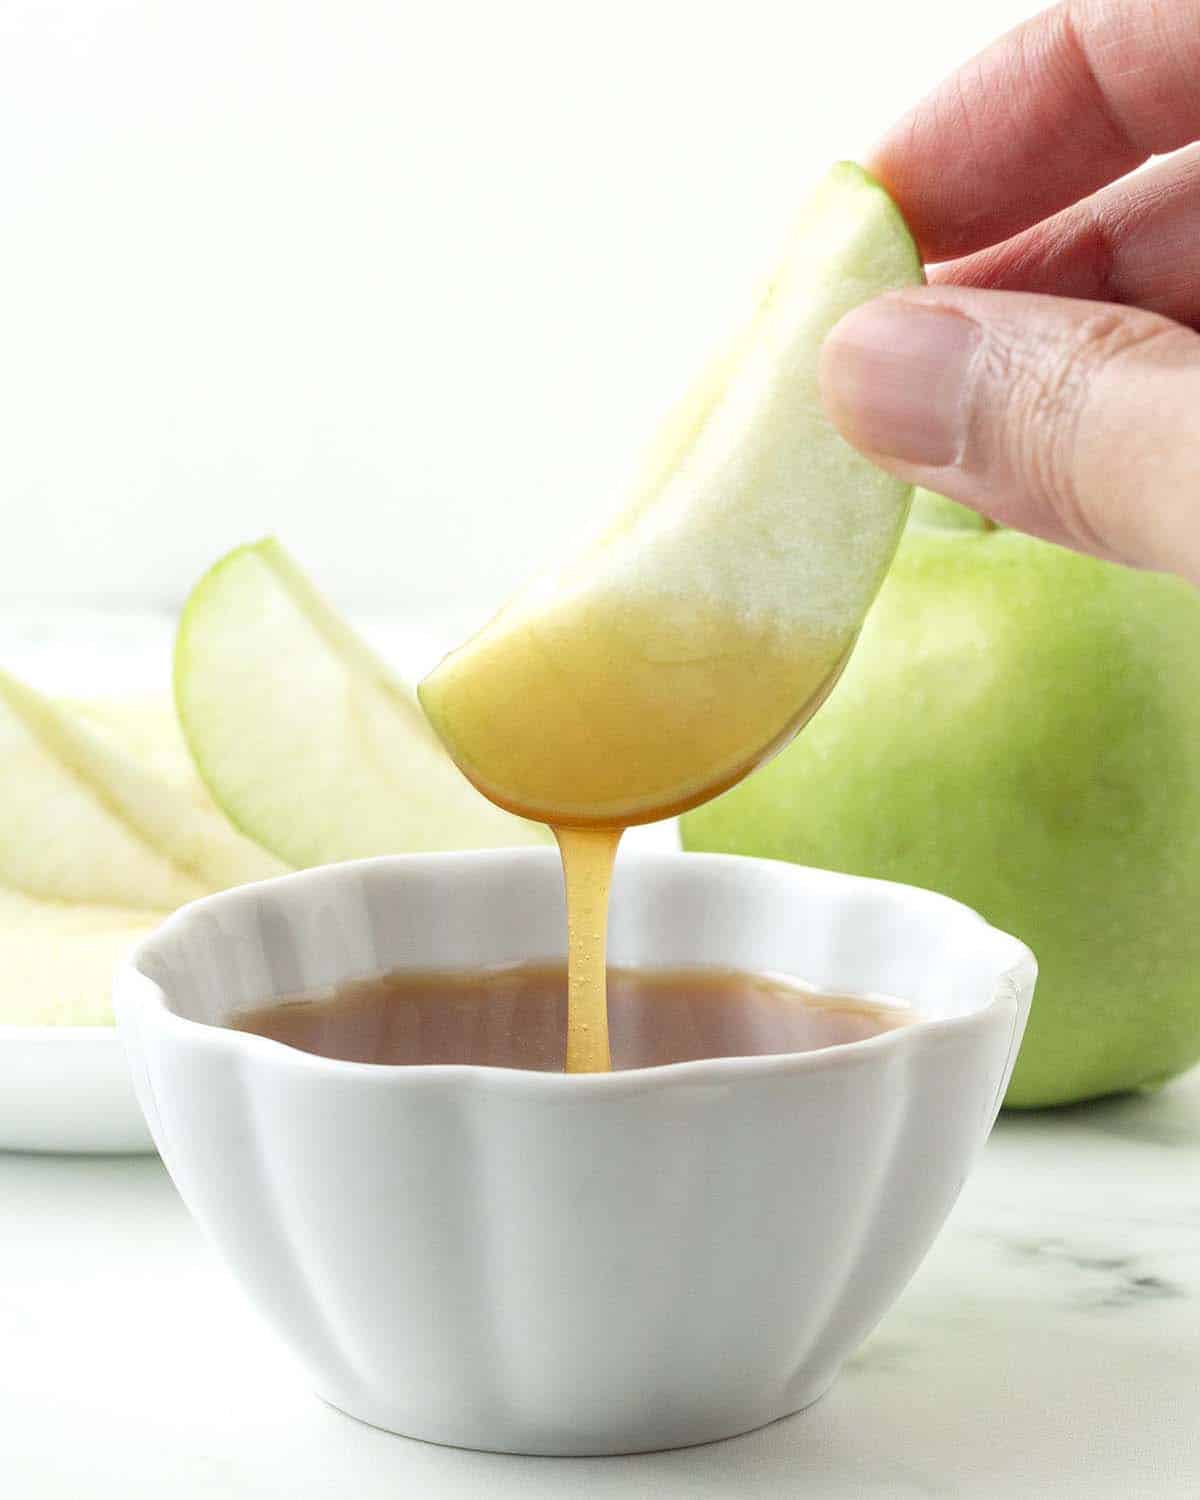 A hand dipping a slice of apple into a small bowl of maple caramel sauce.